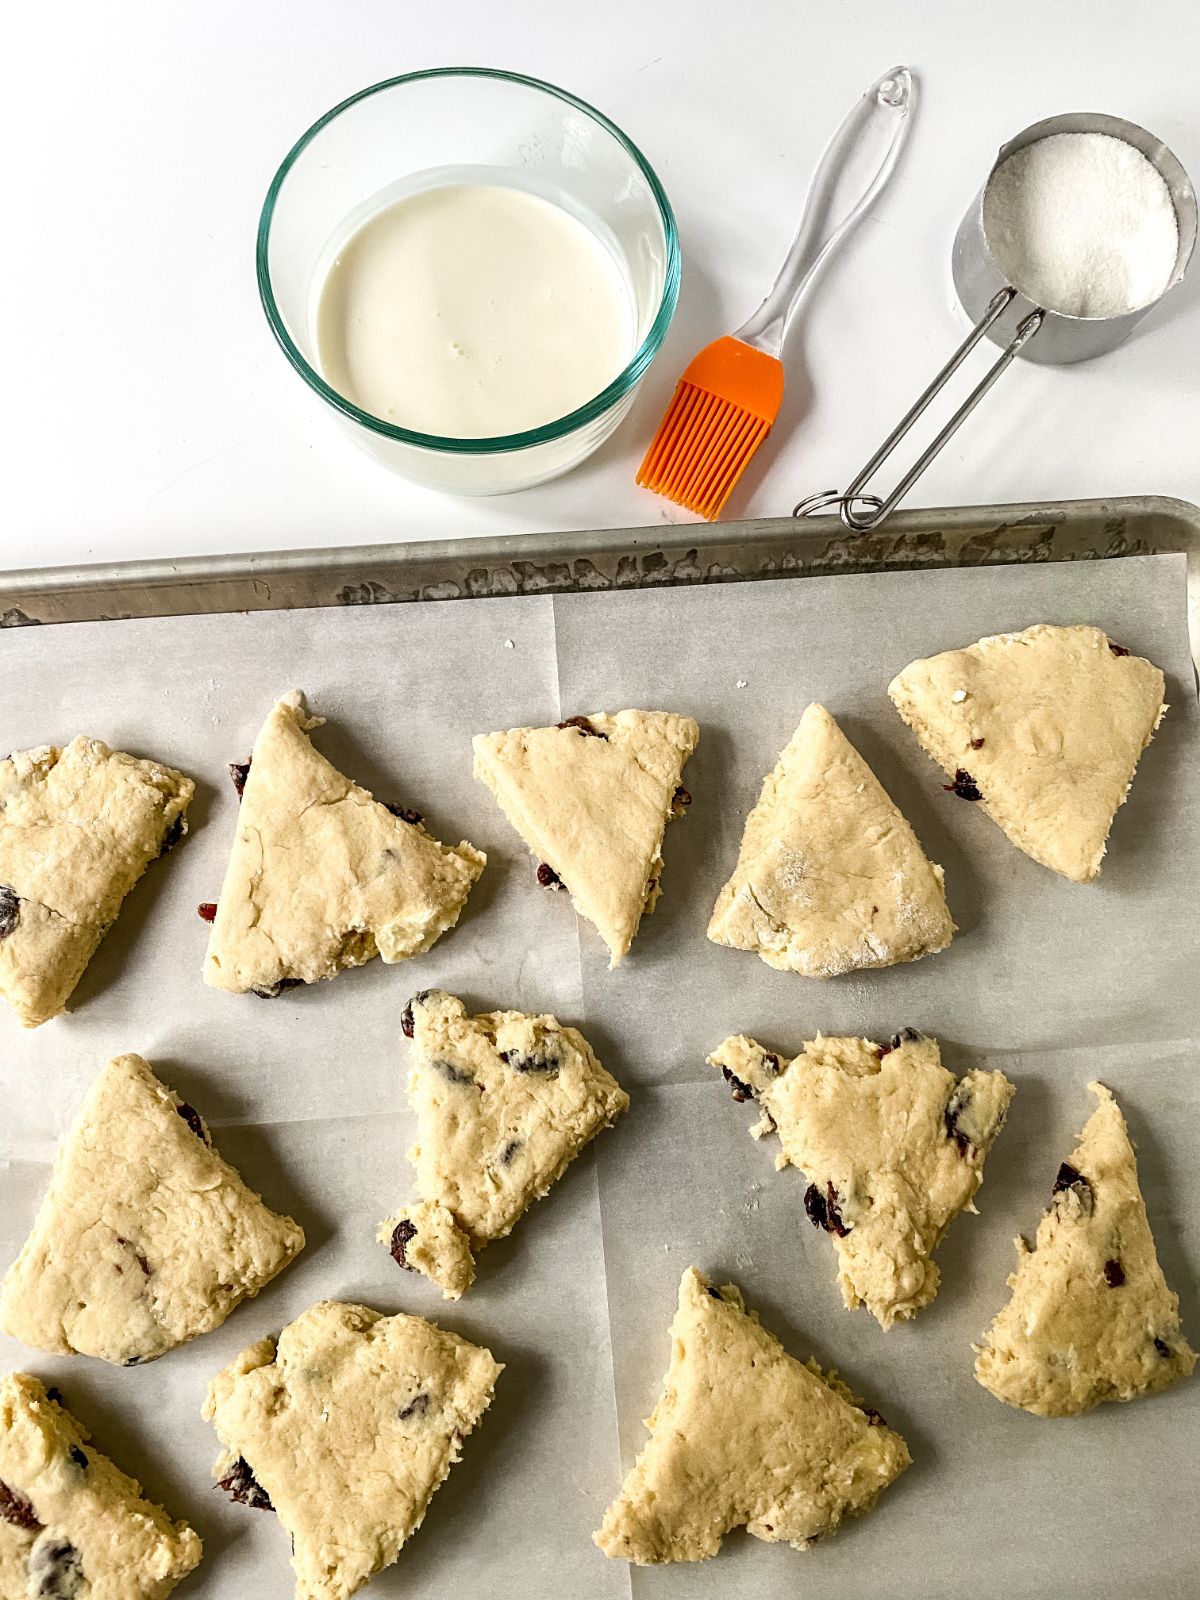 scones cut into triangles on baking sheet